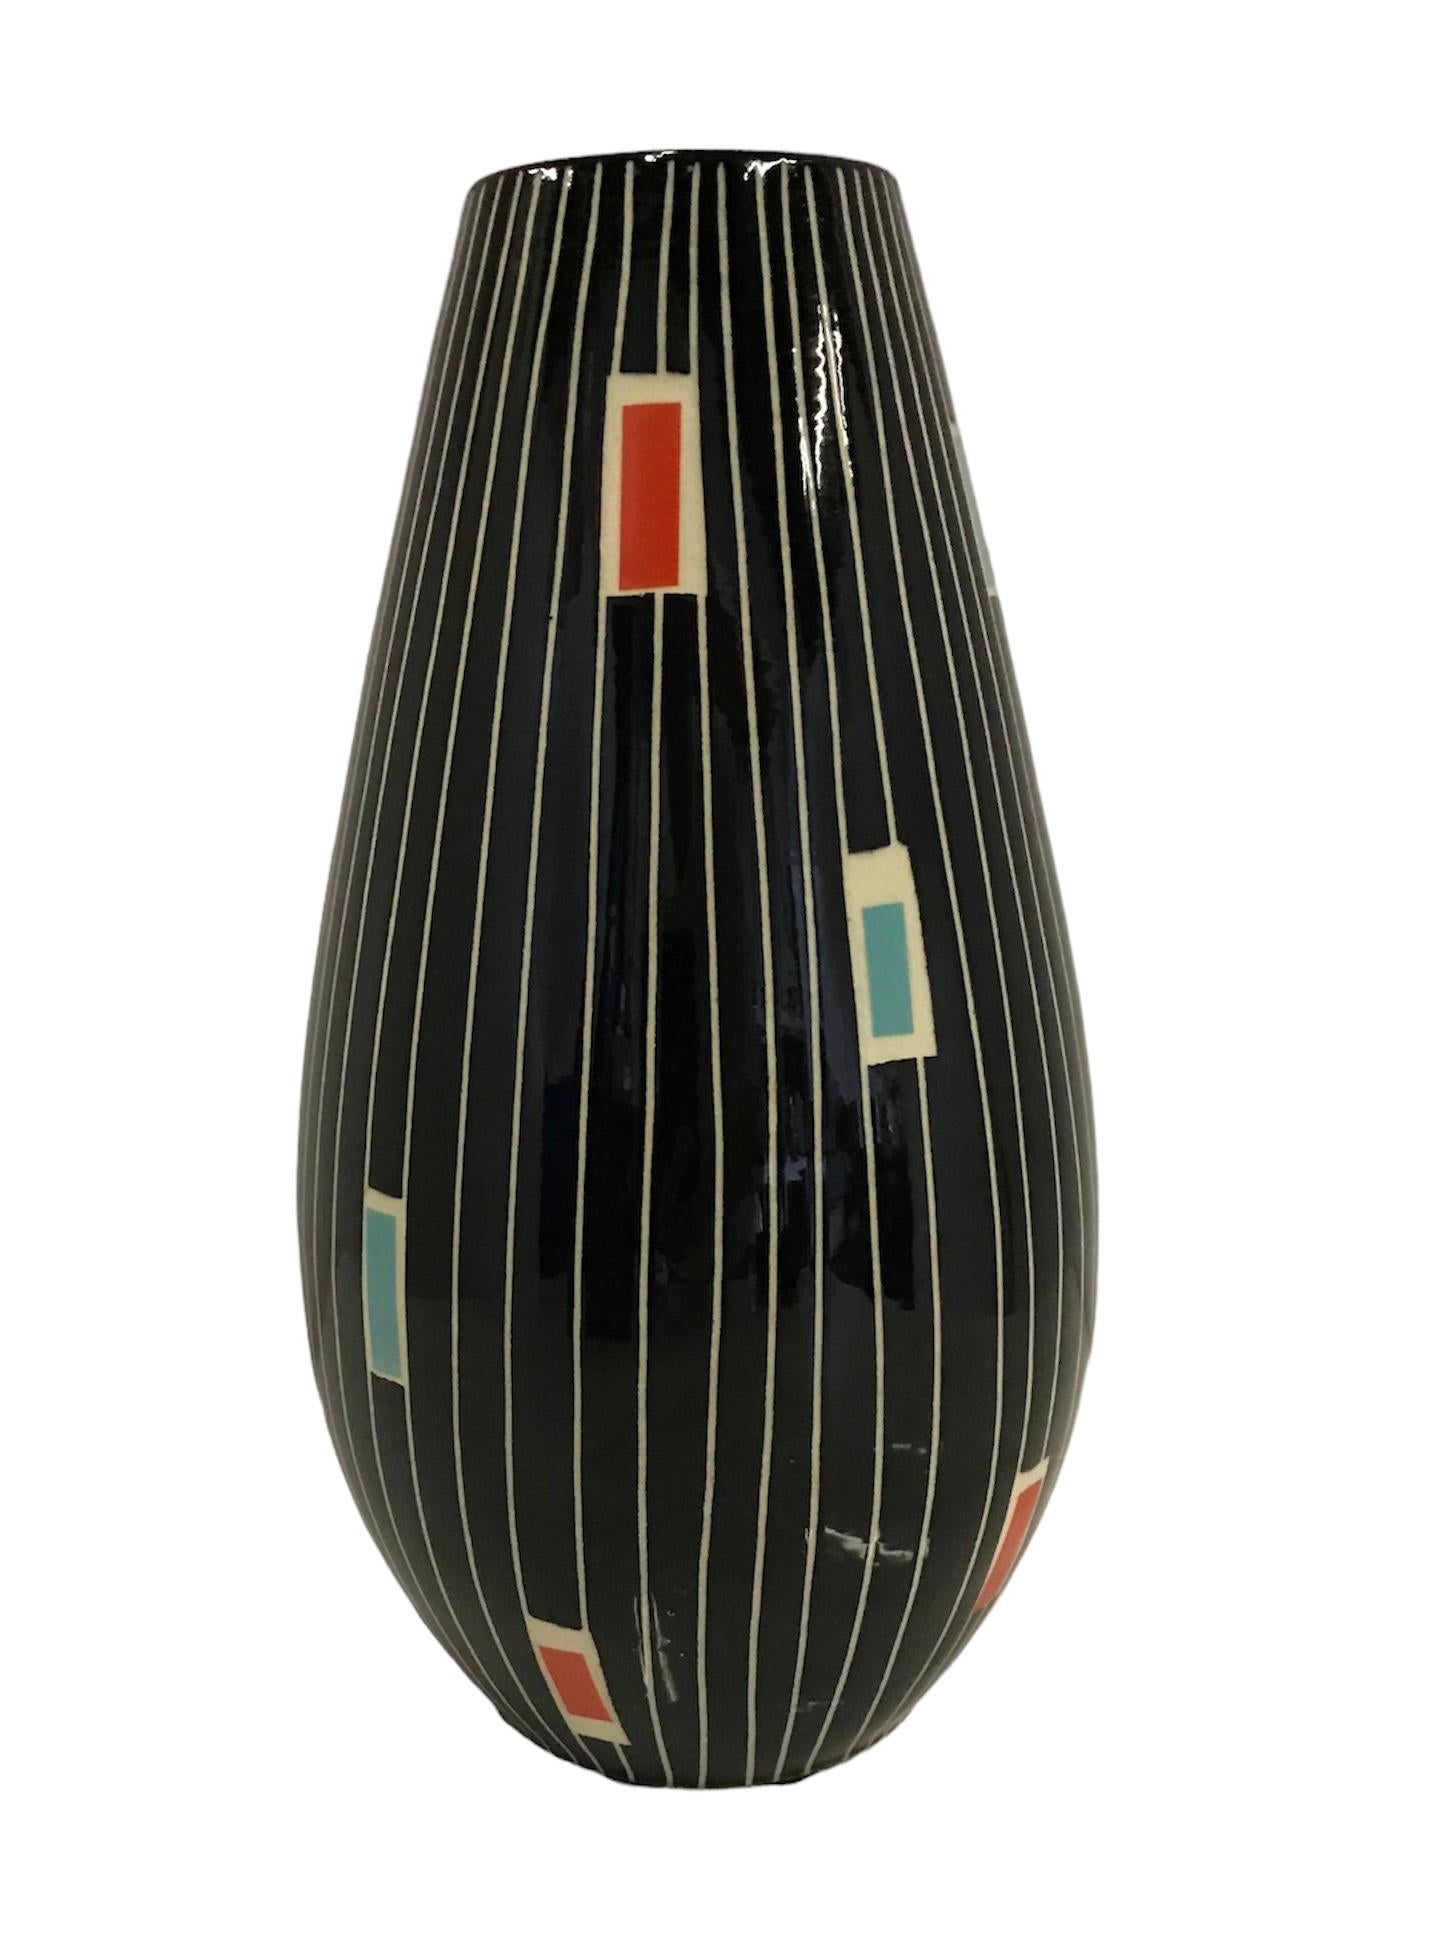 A number of colored rectangles on perpendicular incised white lines over a
black glossy glaze background defines this Mid-Century Modern vase from
Üebelacker-Keramik also known as Ü-Keramik of Germany. The form, 455, from
1960, most likely